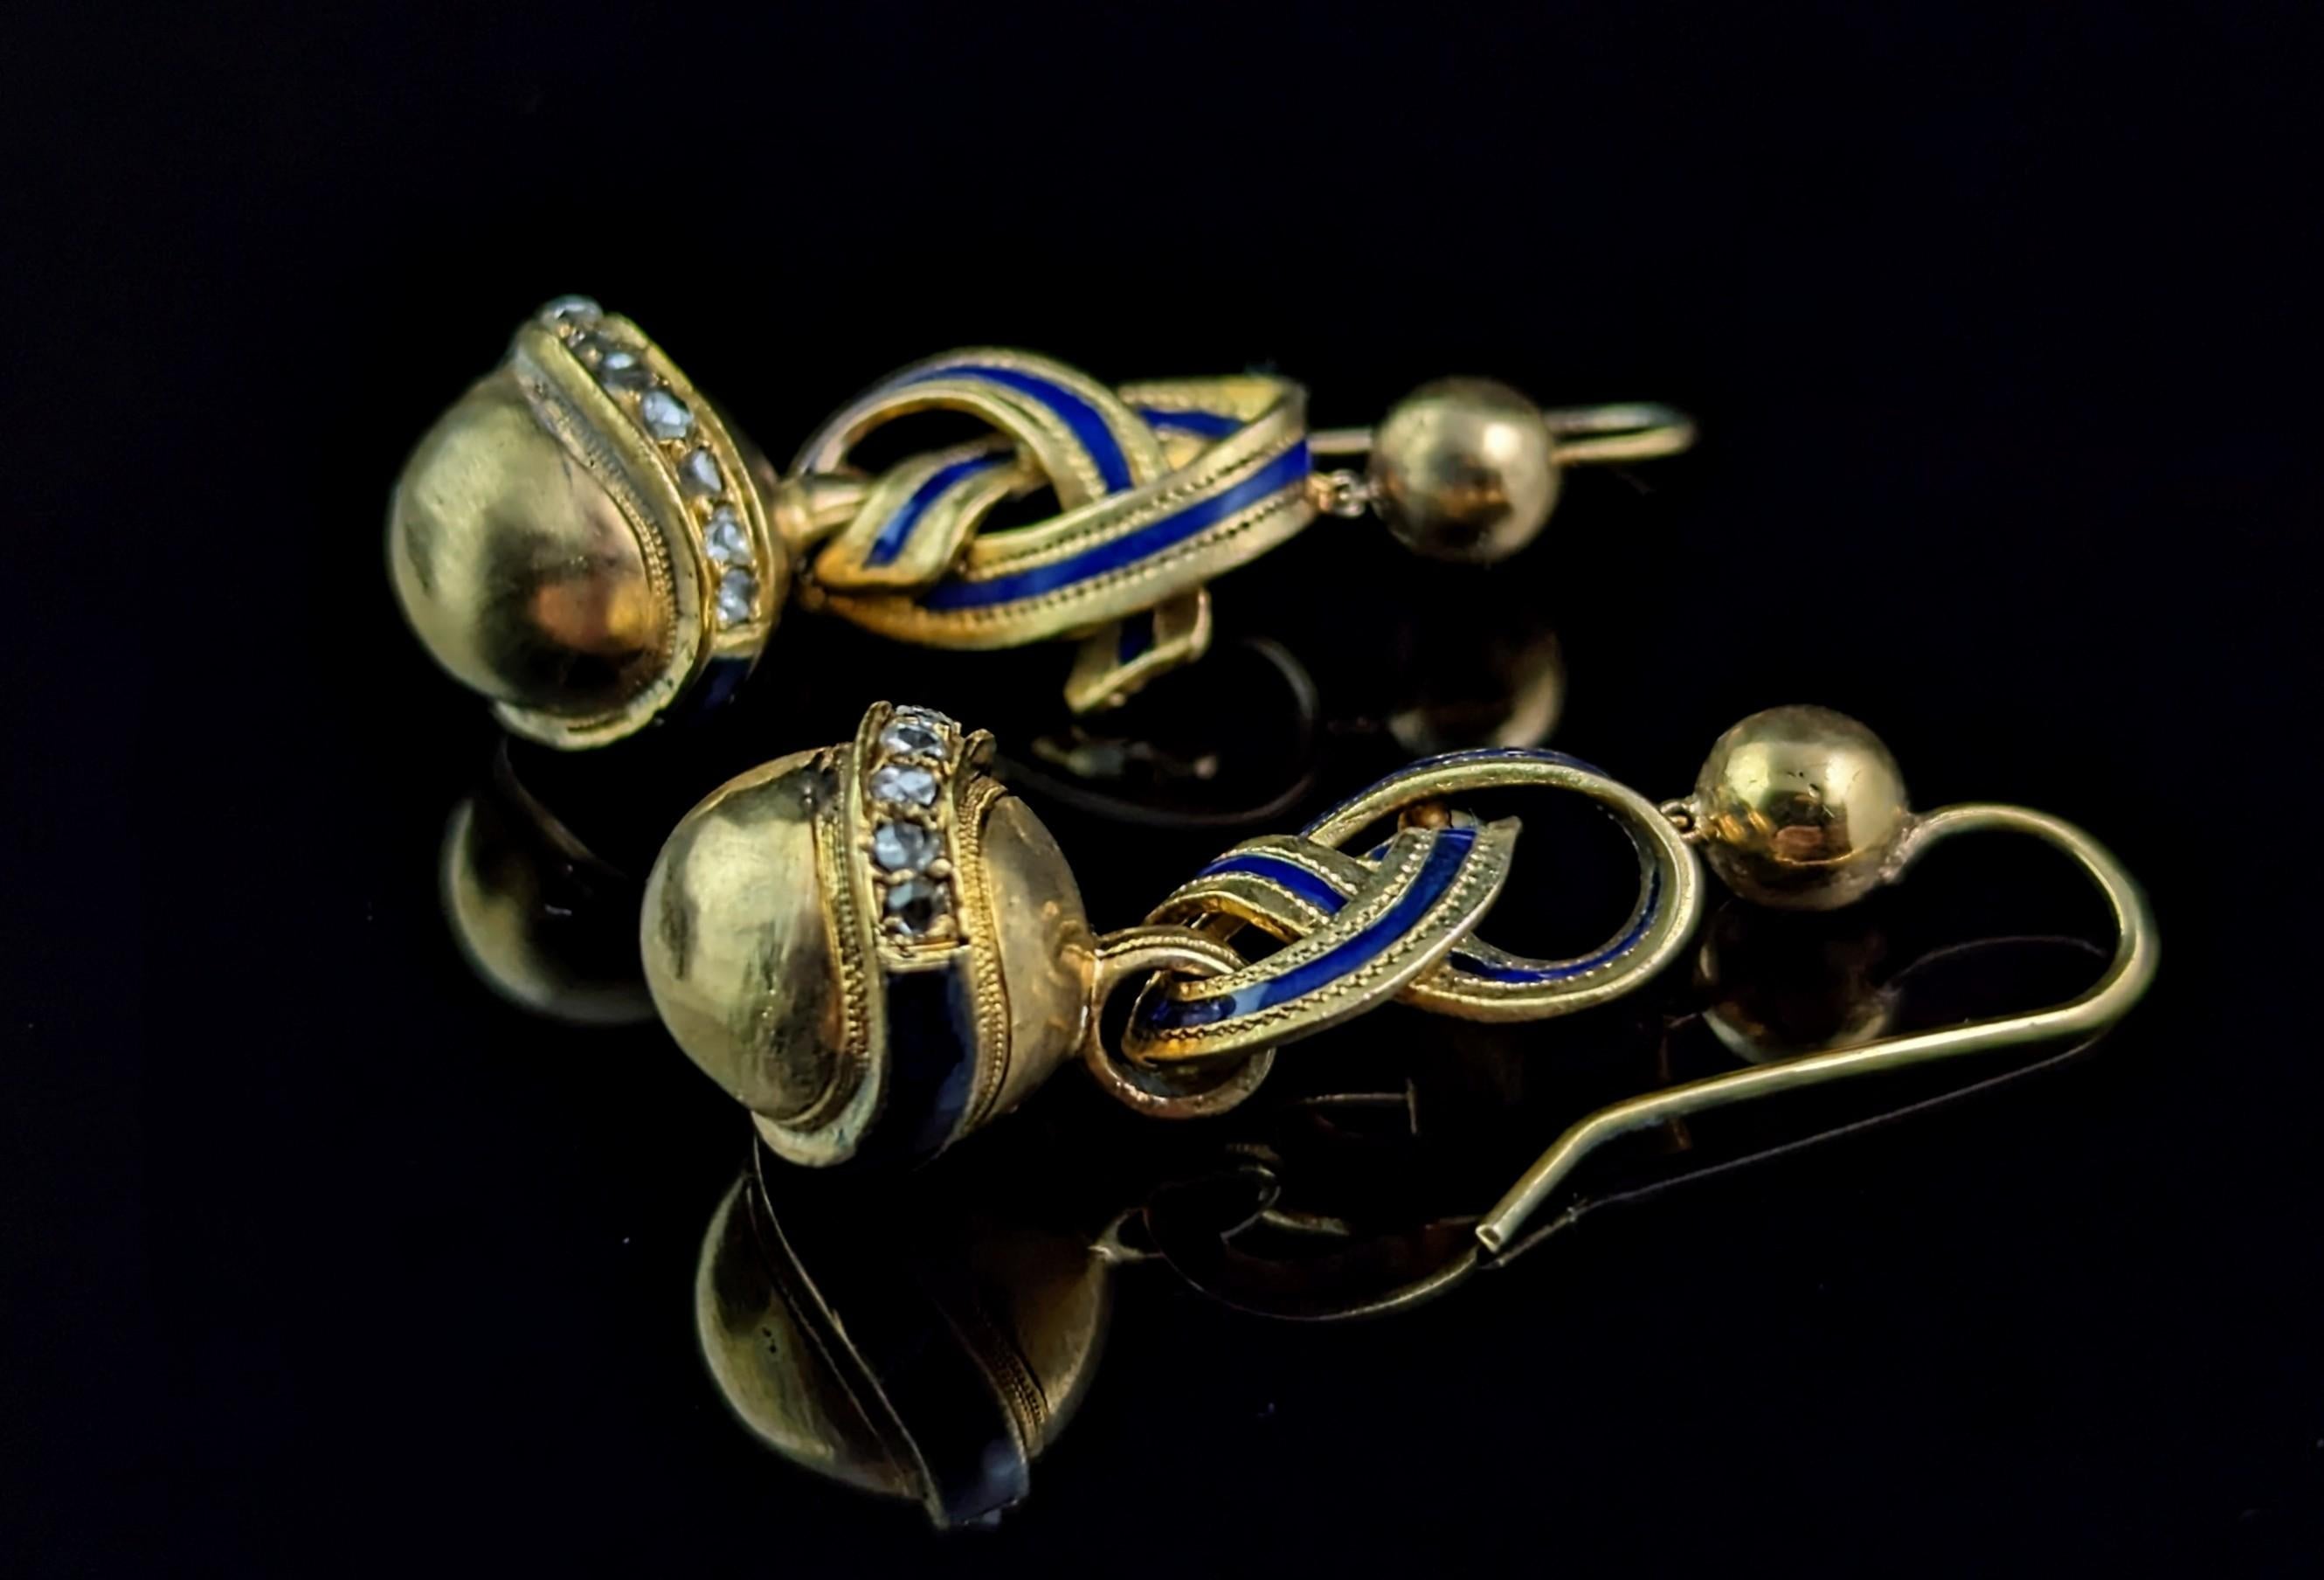 Antique Victorian Diamond lovers knot earrings, 15k gold and Blue enamel For Sale 1